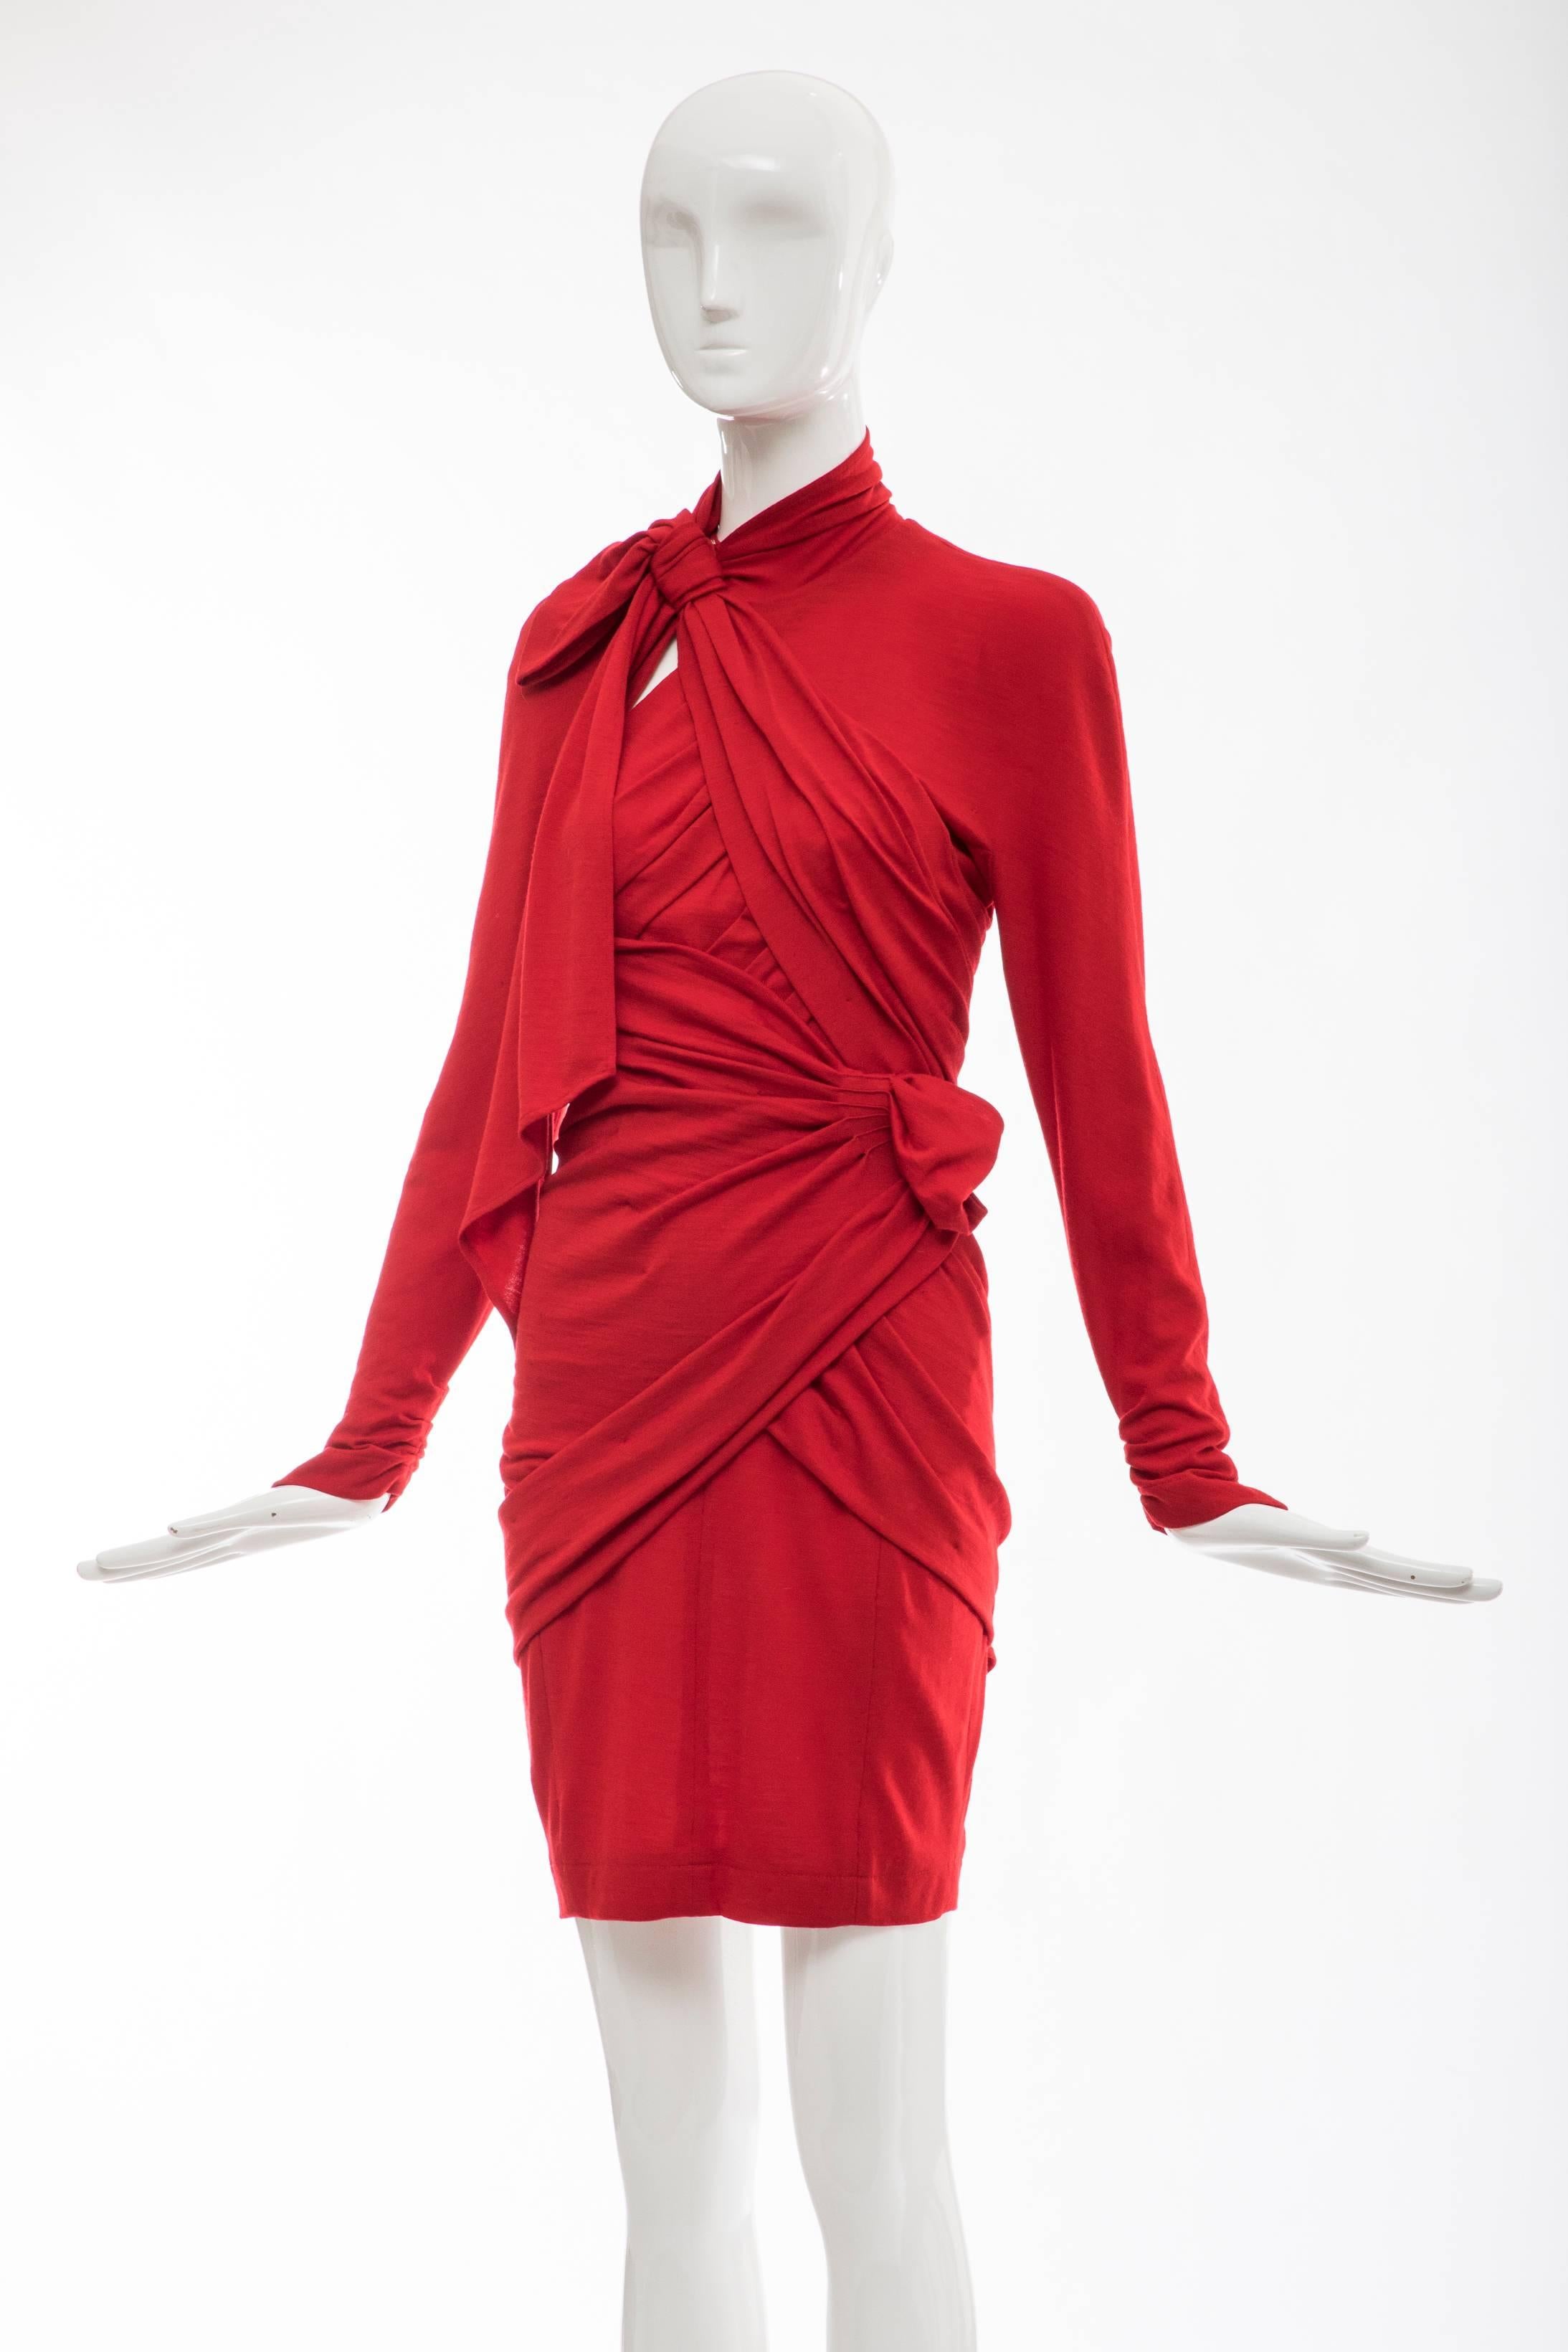 Thierry Mugler Red Wool Jersey Ruched Dress with Built-In-Corset, Circa: 1980's 2